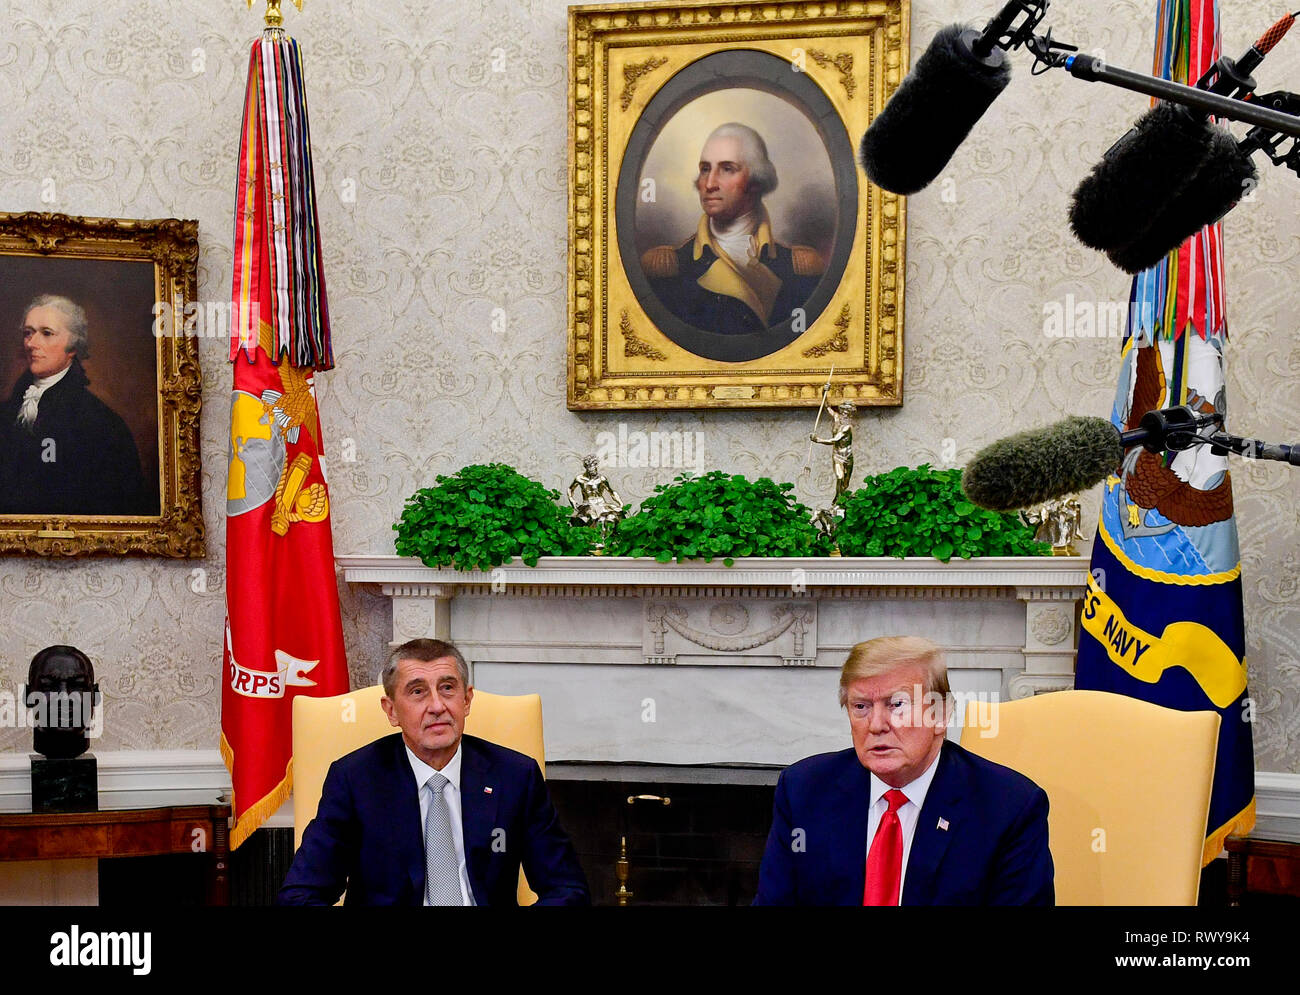 Washington, United States. 07th Mar, 2019. US President Donald Trump, right, and Czech Prime Minister Andrej Babis meet journalists in Oval Office of the White House in Washington, USA, March 7, 2019. Credit: Roman Vondrous/CTK Photo/Alamy Live News Stock Photo